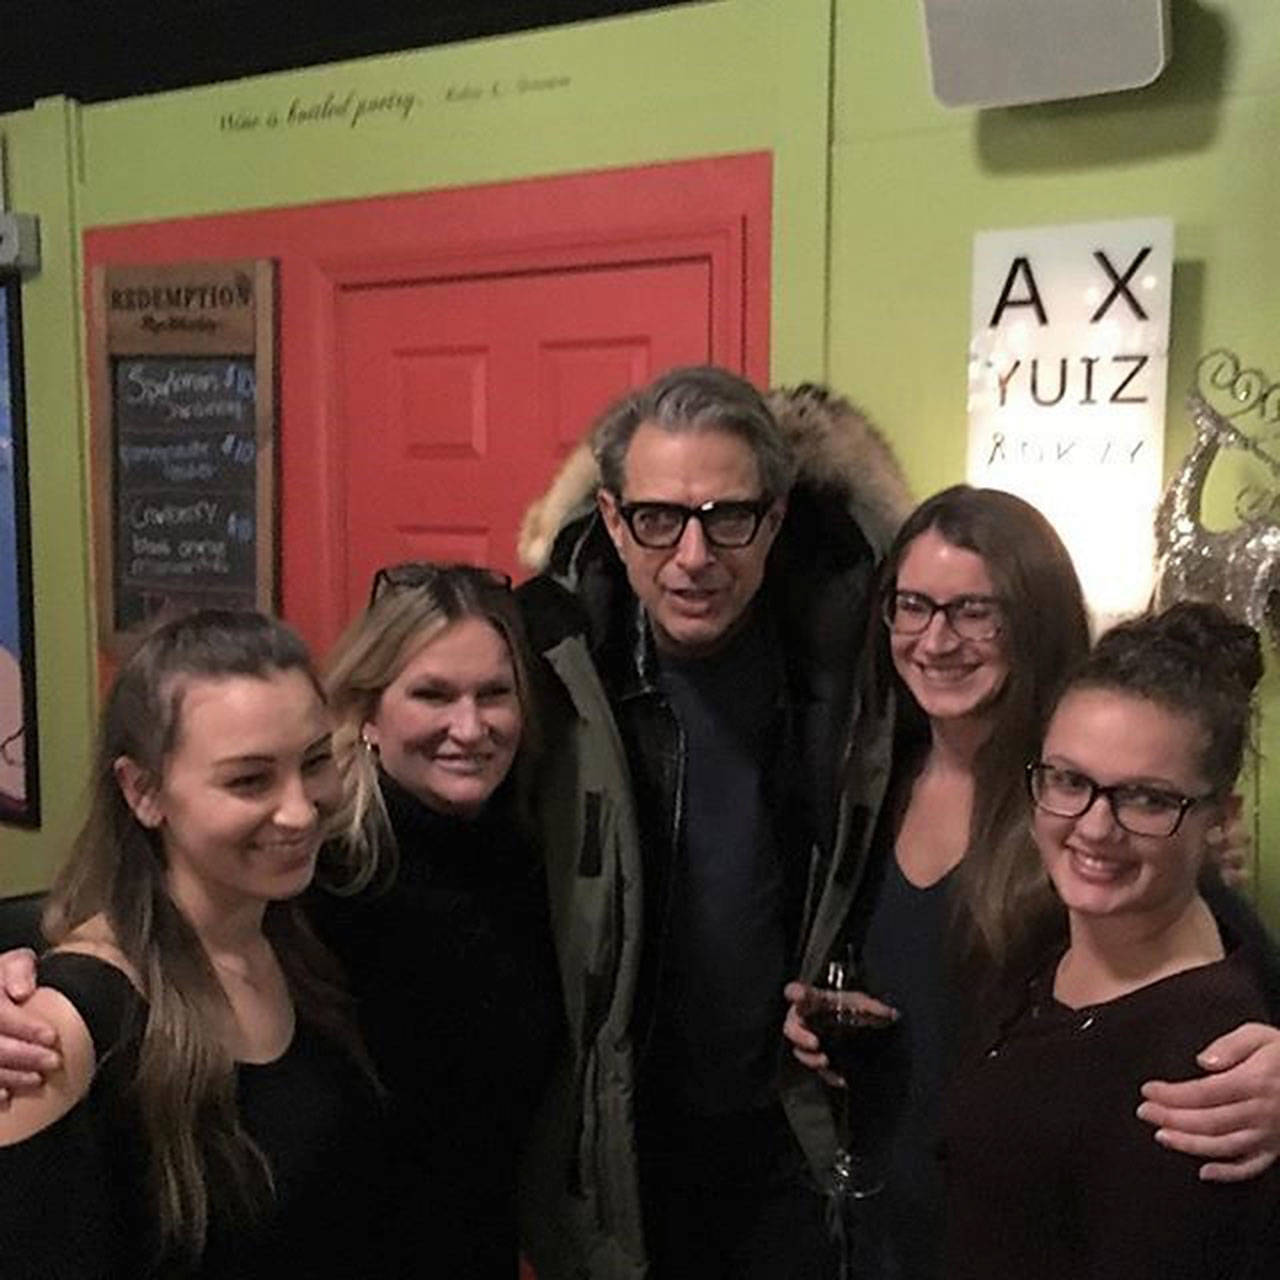 Amanda Florea, Kim McDougal, Carly Swingle, and Devon Santiago pose for a photo with actor Jeff Goldblum on Dec. 5 in Blondie’s Plate. Goldblum was in the area filming scenes for the new movie “The Mountain.” Photo courtesy of Darren Stephens